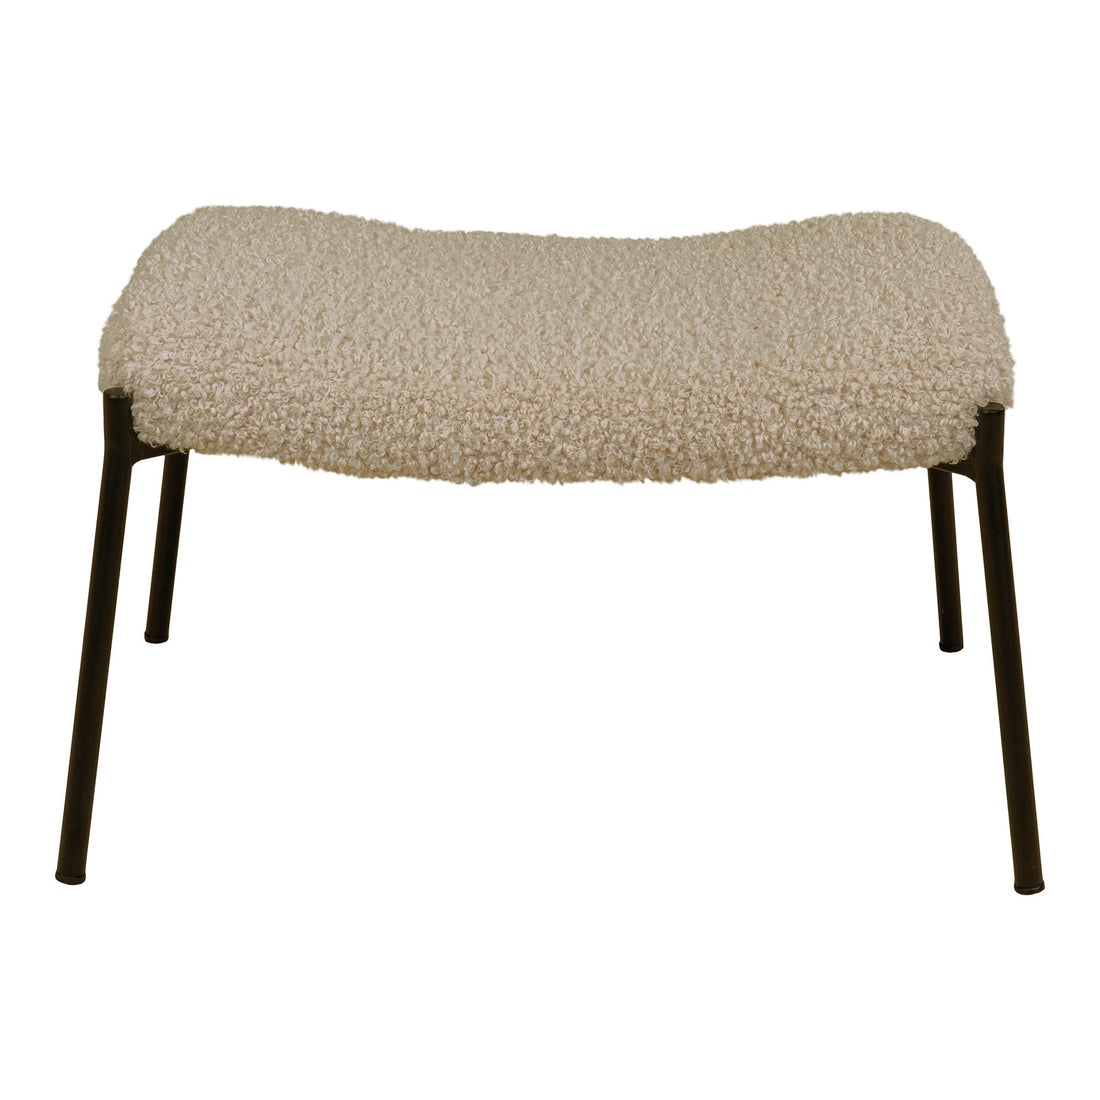 Glasgow footstool - footstool in gray -brown artificial lambskin with black legs - 1 - pcs